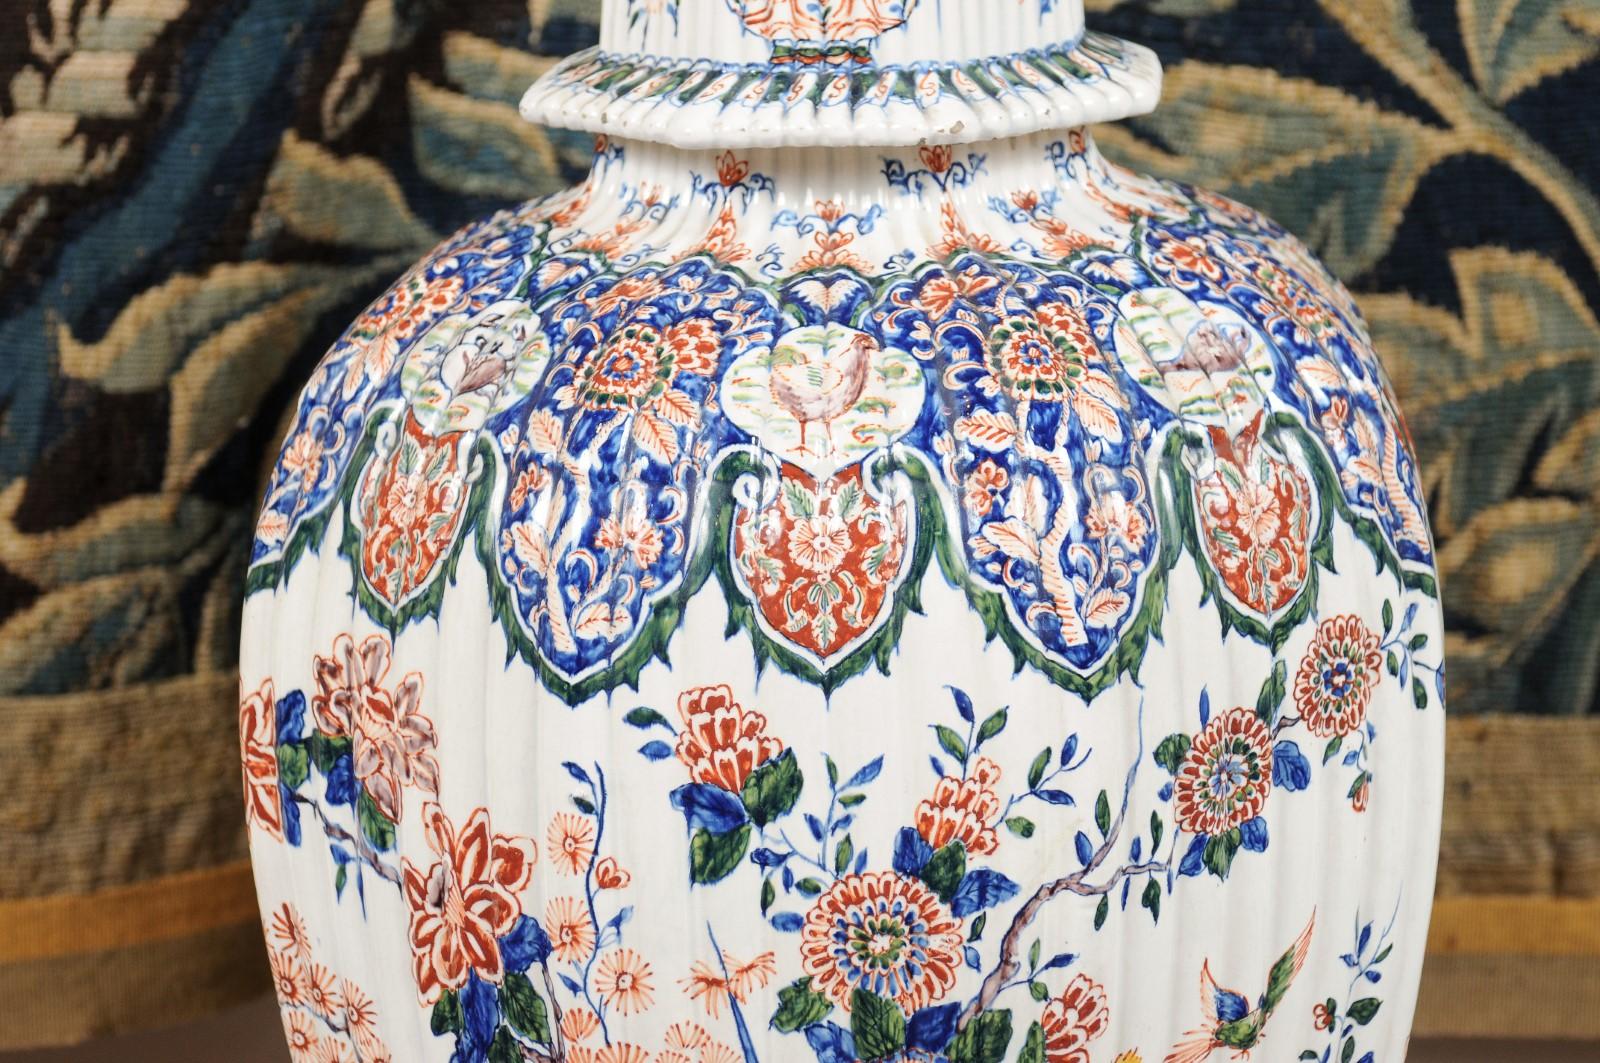 19th Century Ribbed Polychrome Delft Urn with Lid Featuring Lion Finial For Sale 2